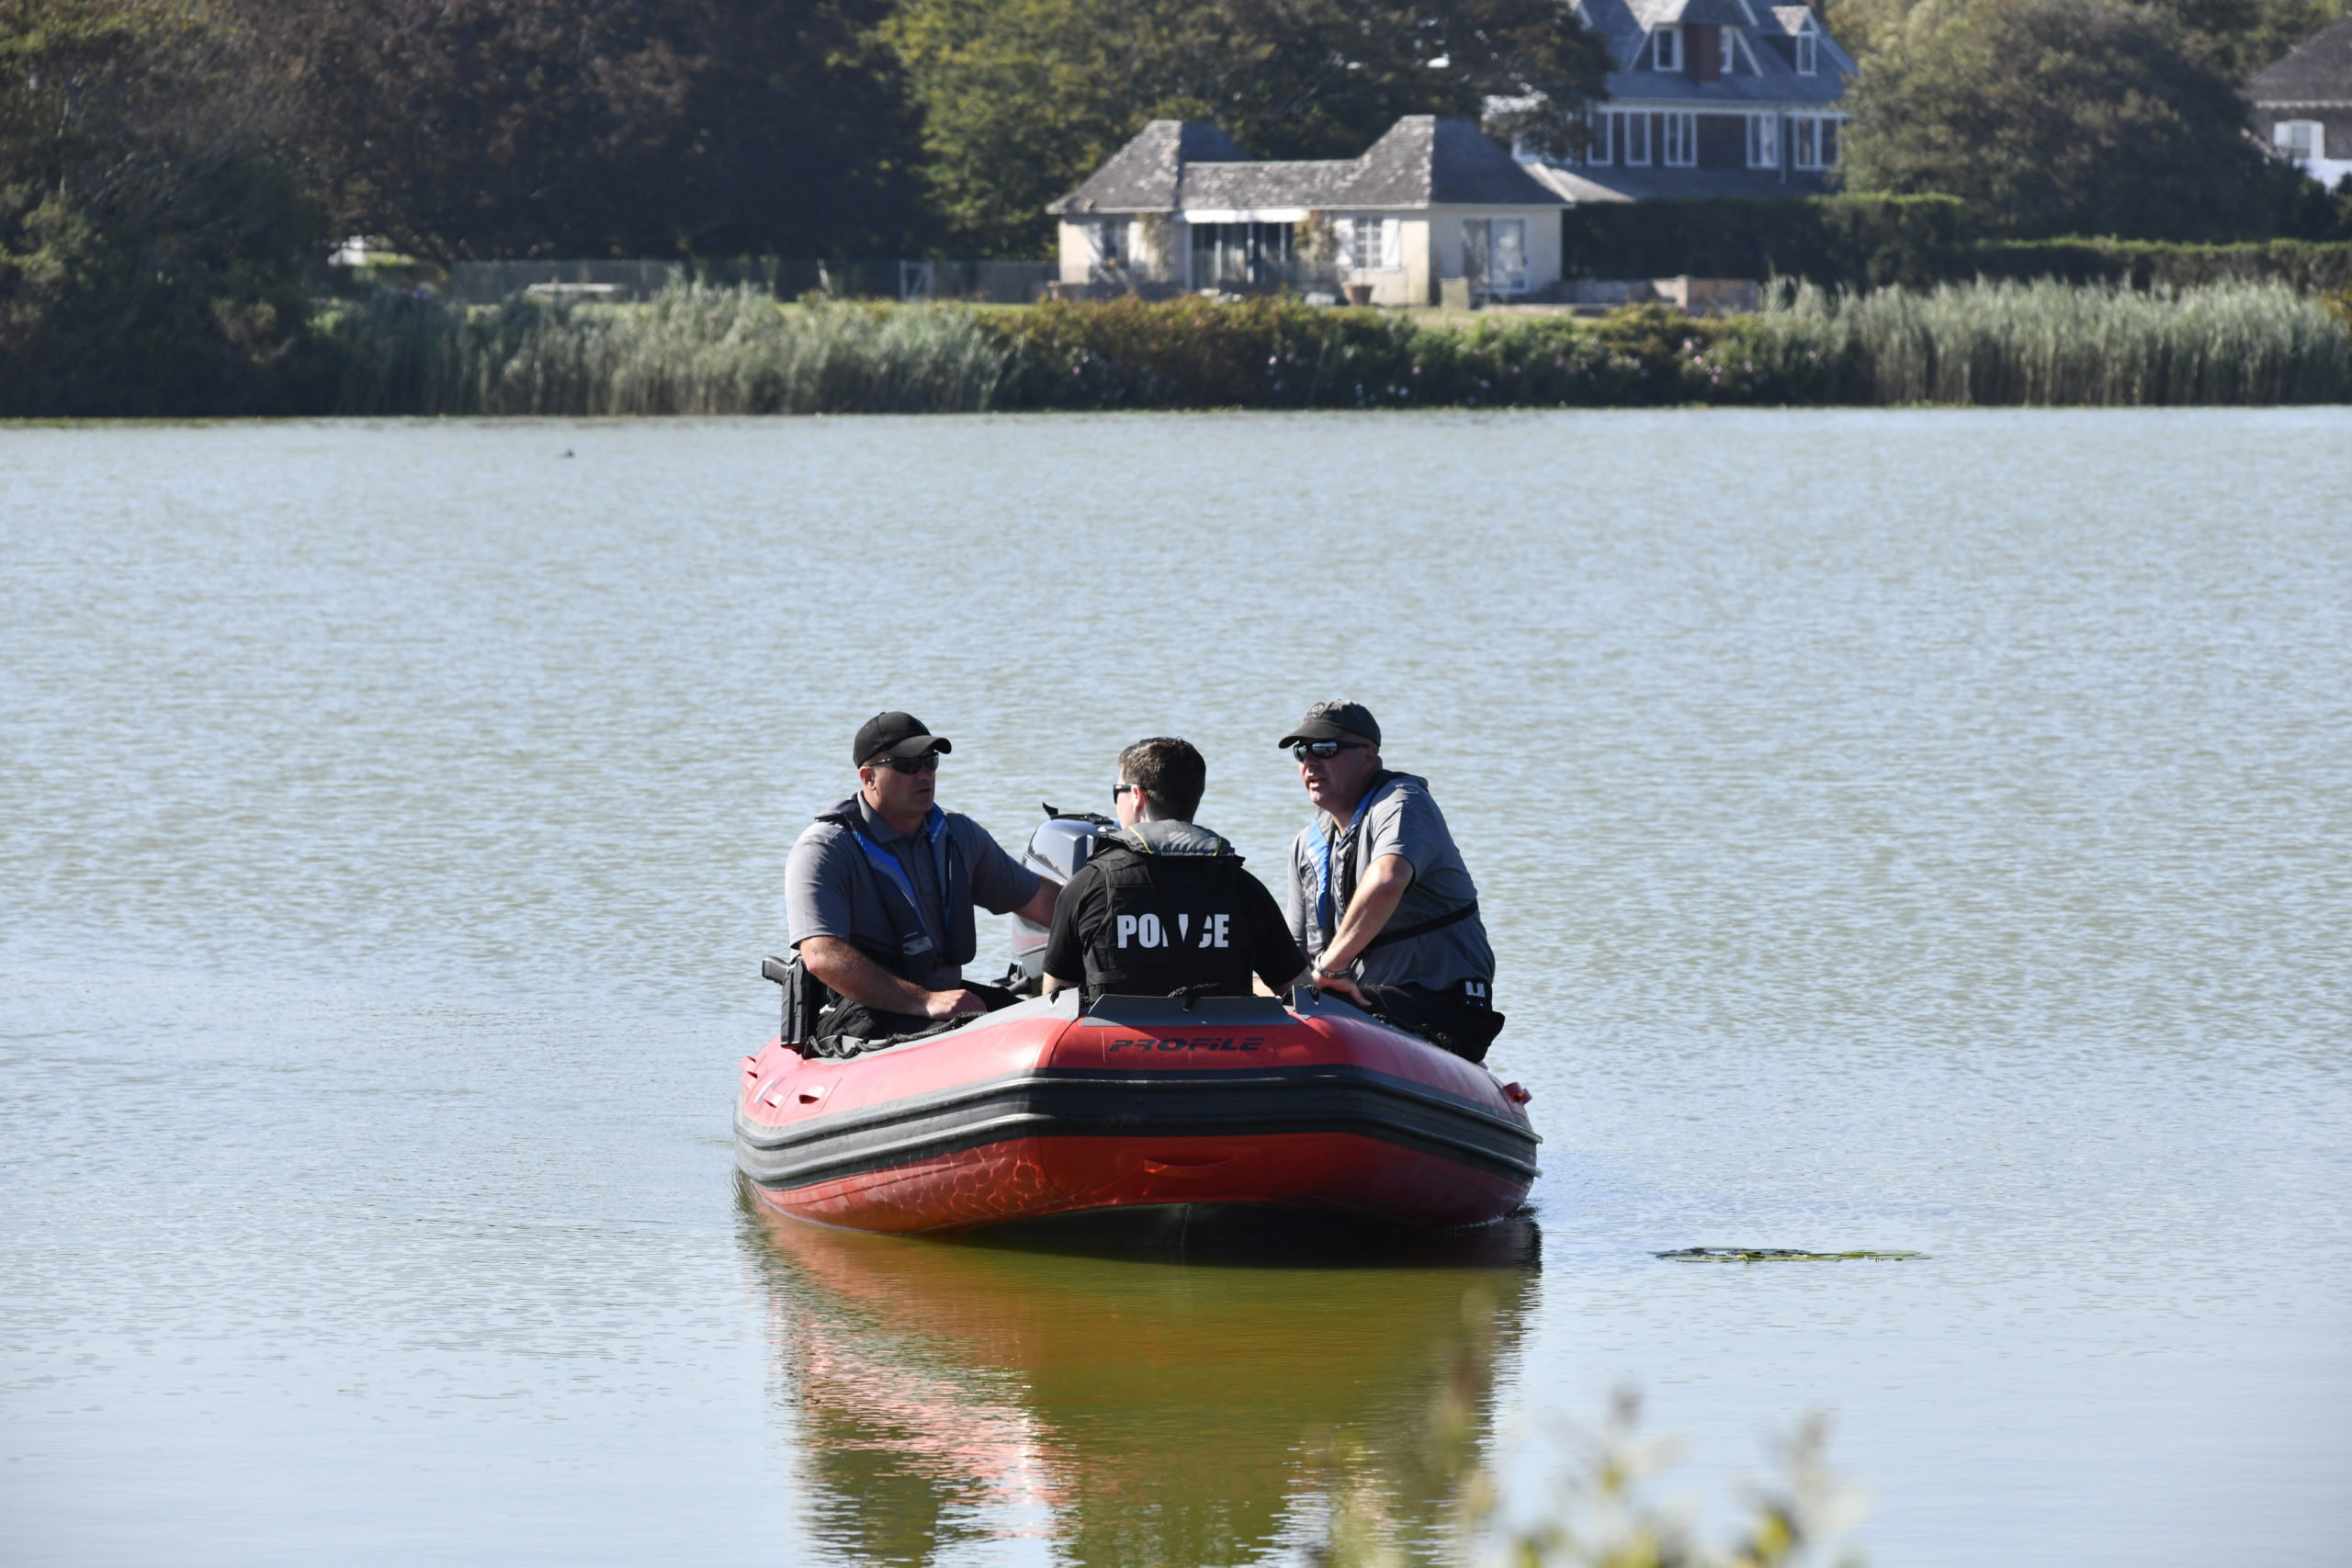 Police on Lake Agawam on Saturday afternoon in advance of Donald Trump's visit for a fundraising event.  DANA SHAW